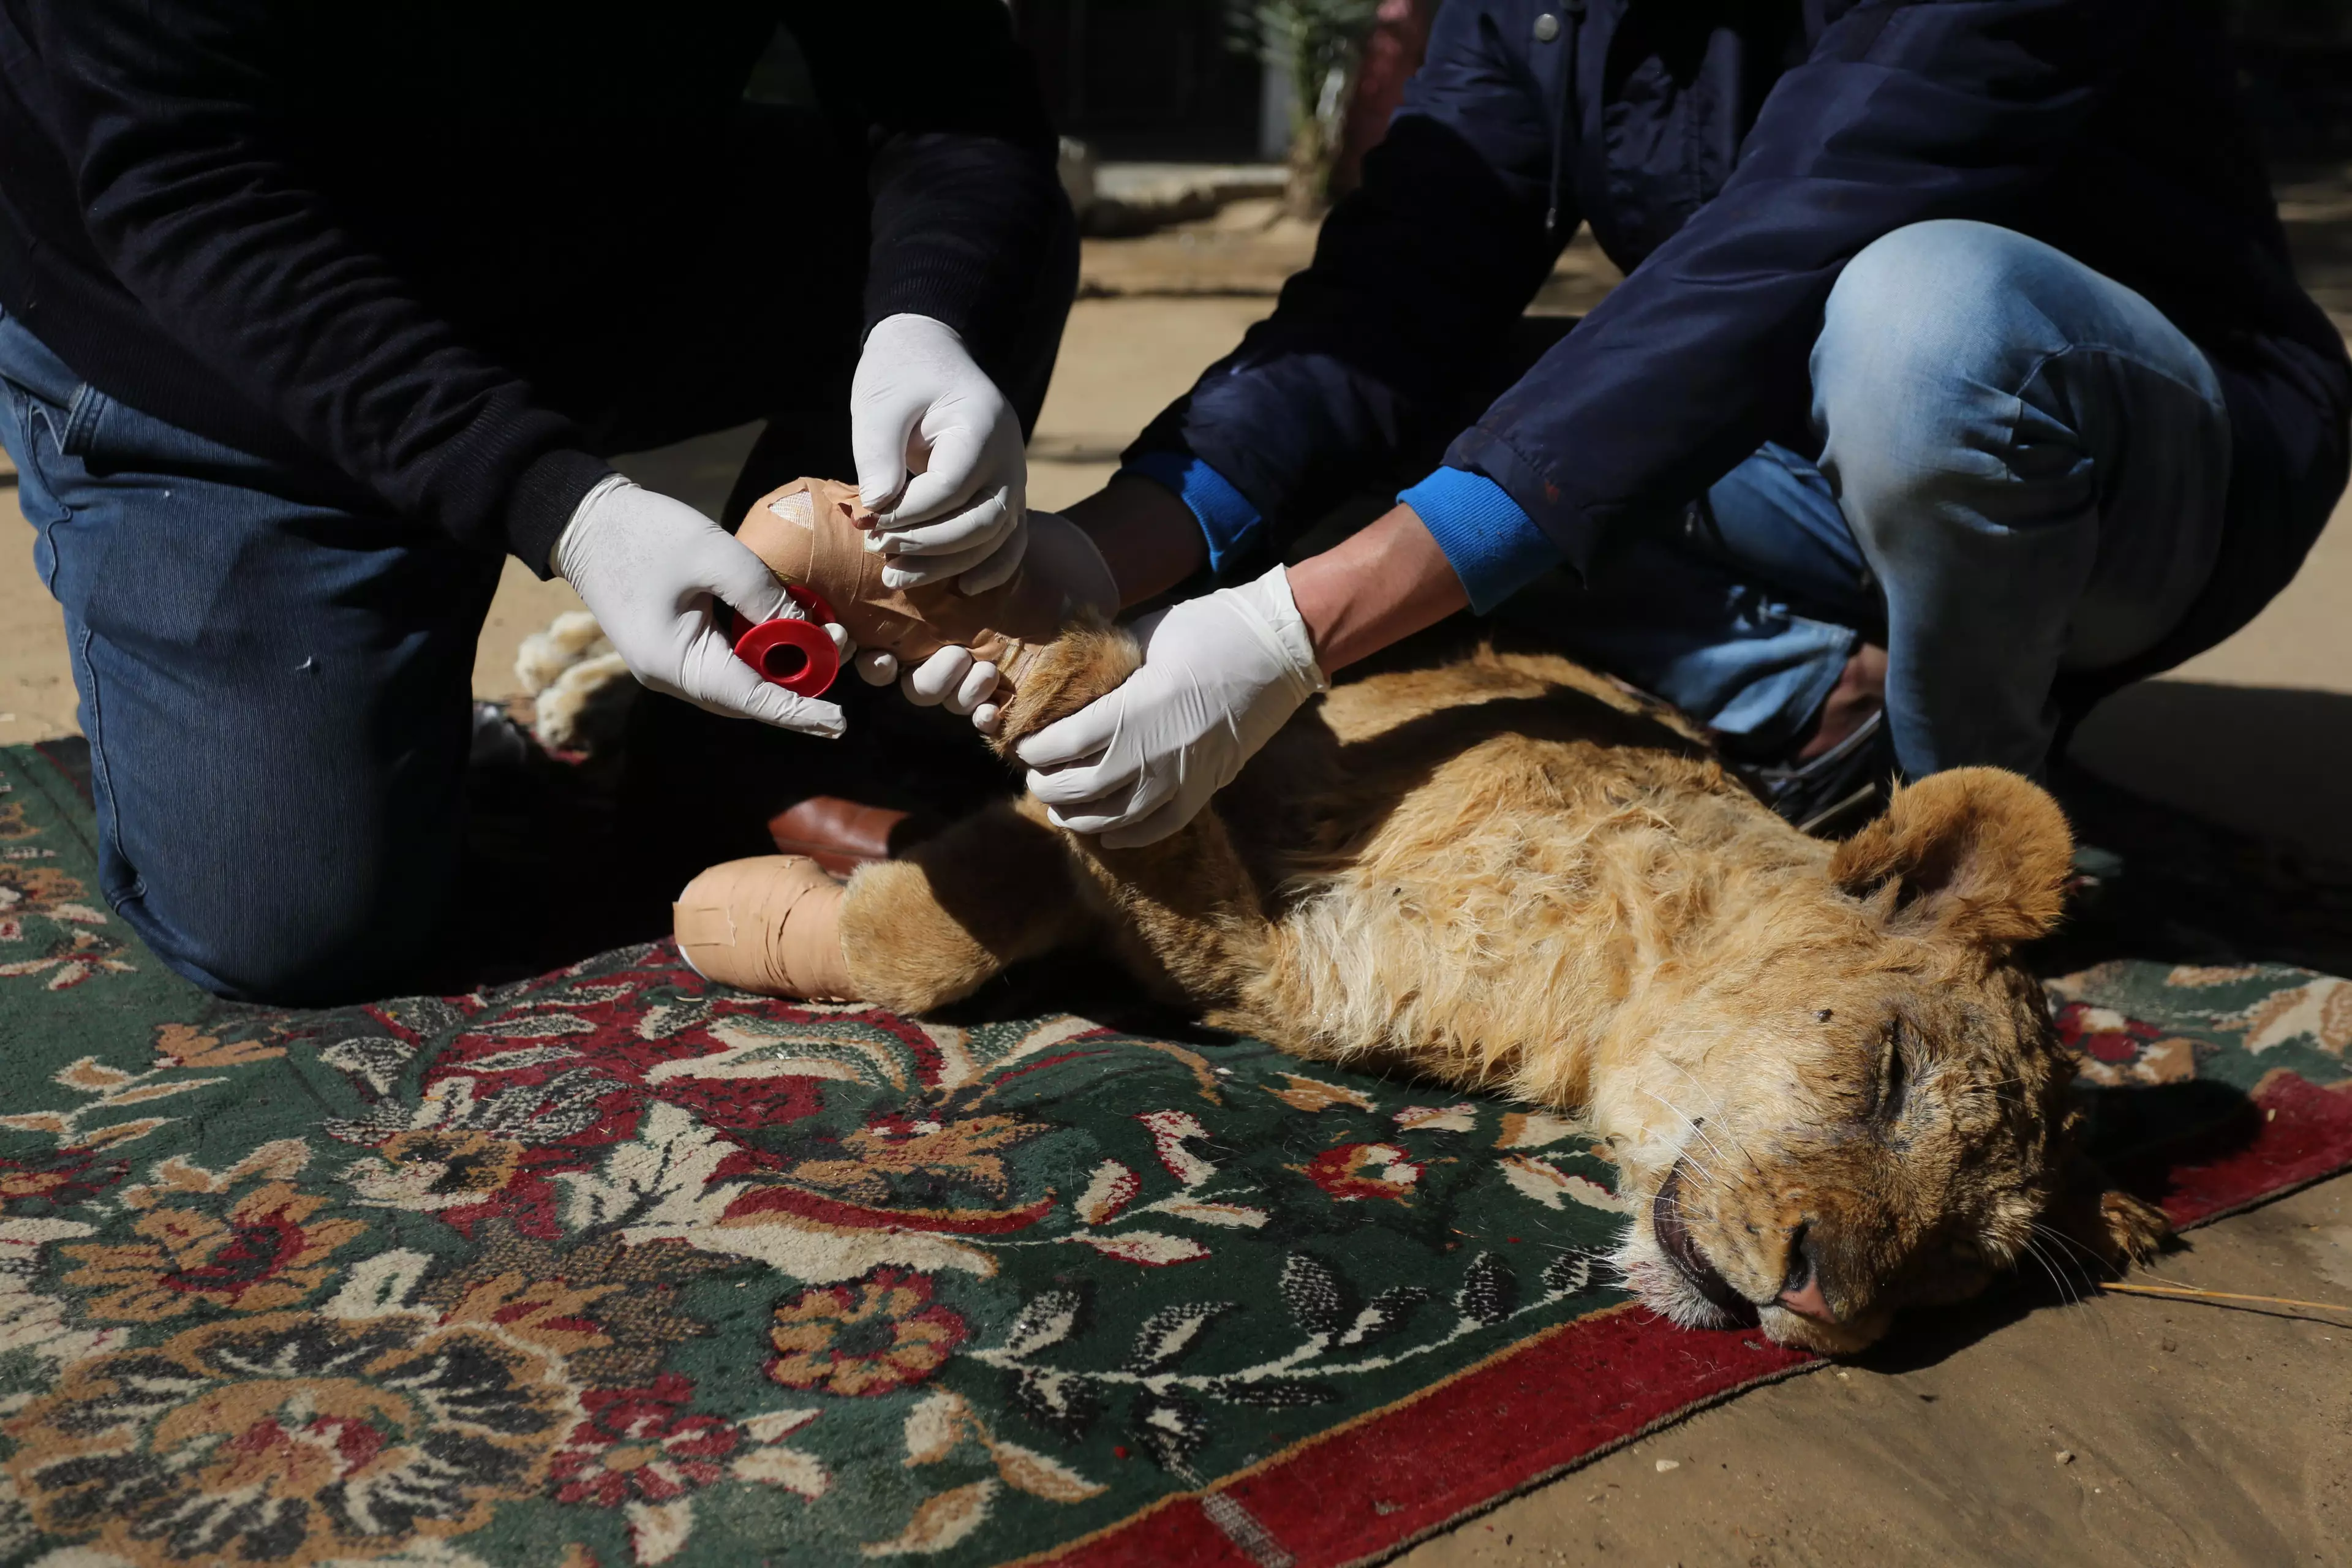 The procedure of removing Falenstine's claws took place in the zoo by the vet.